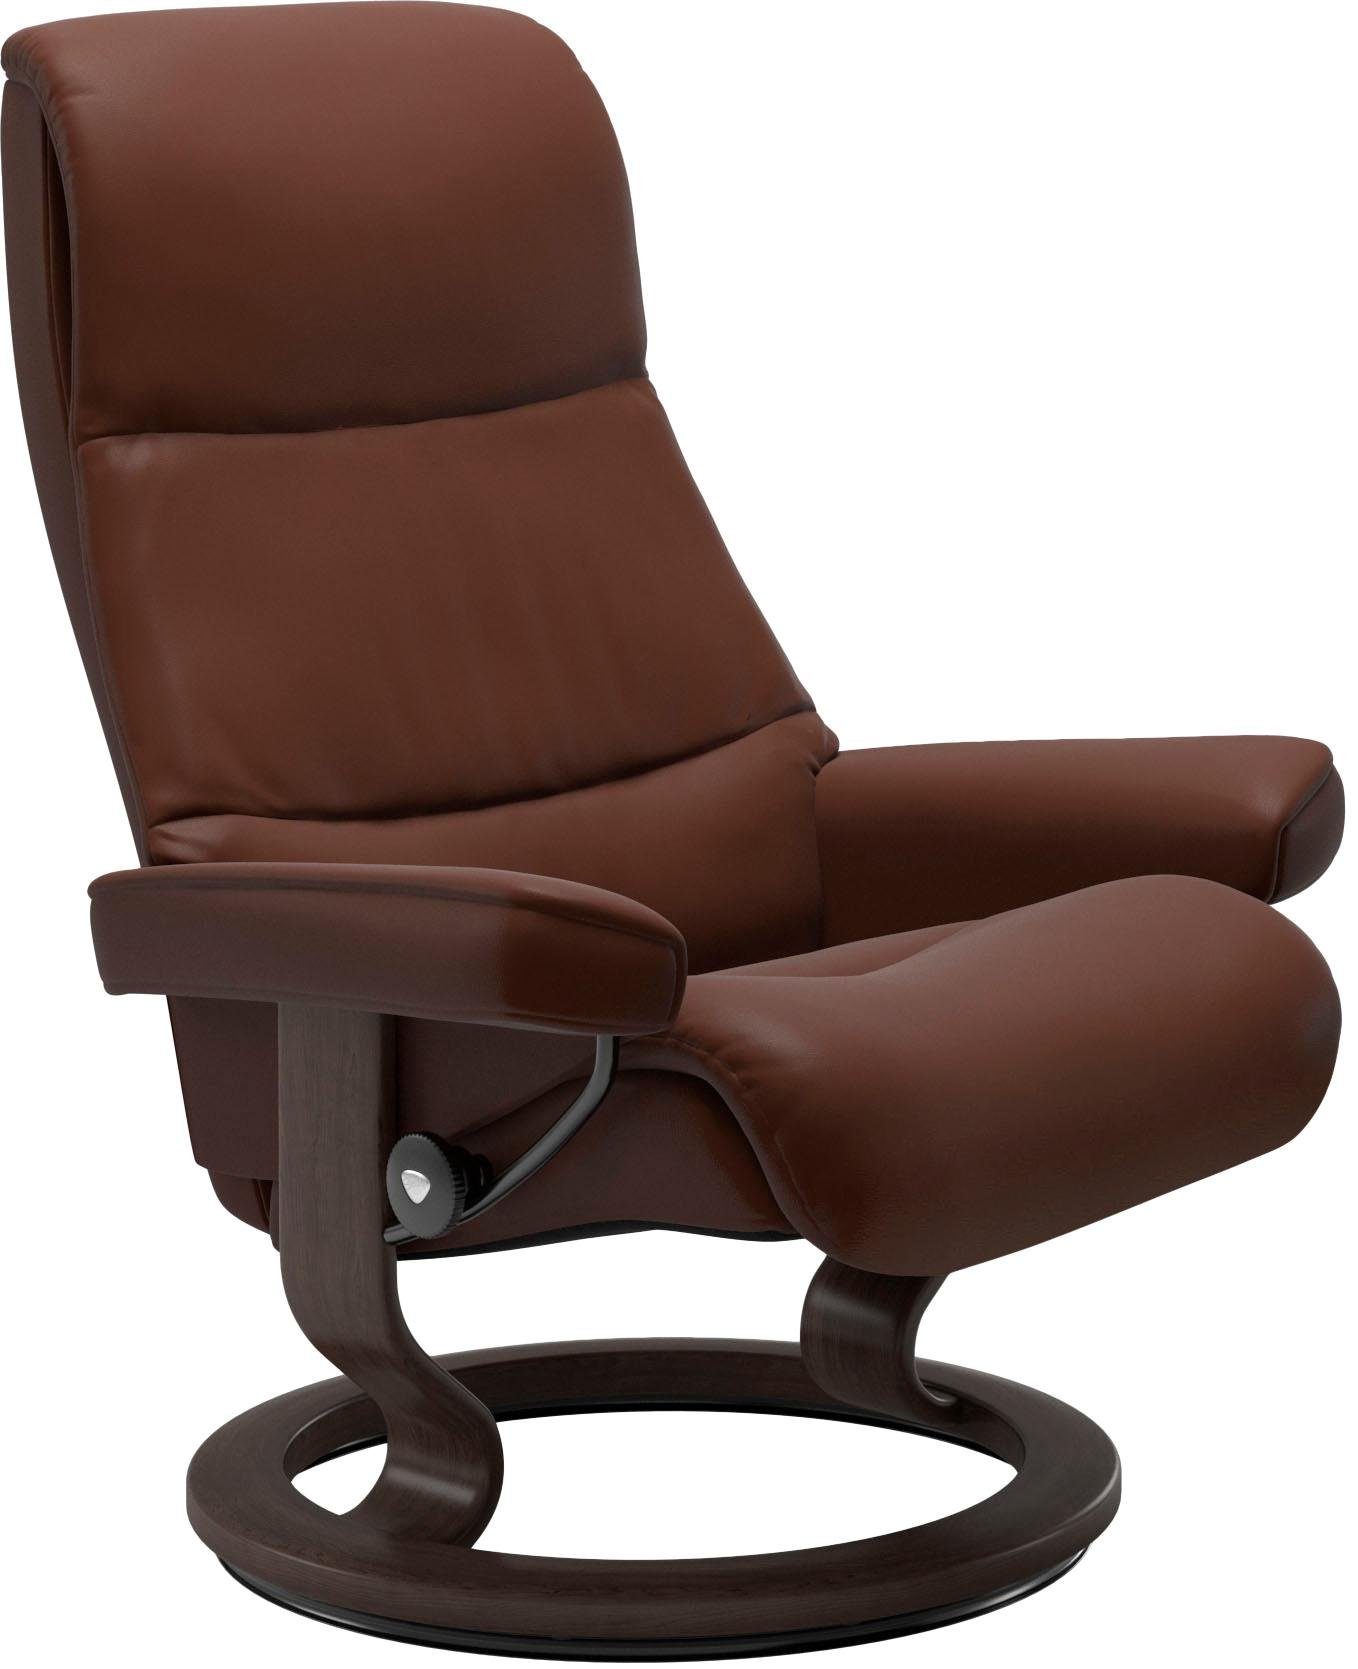 Stressless® Relaxsessel L,Gestell Base, View, Classic Größe mit Wenge